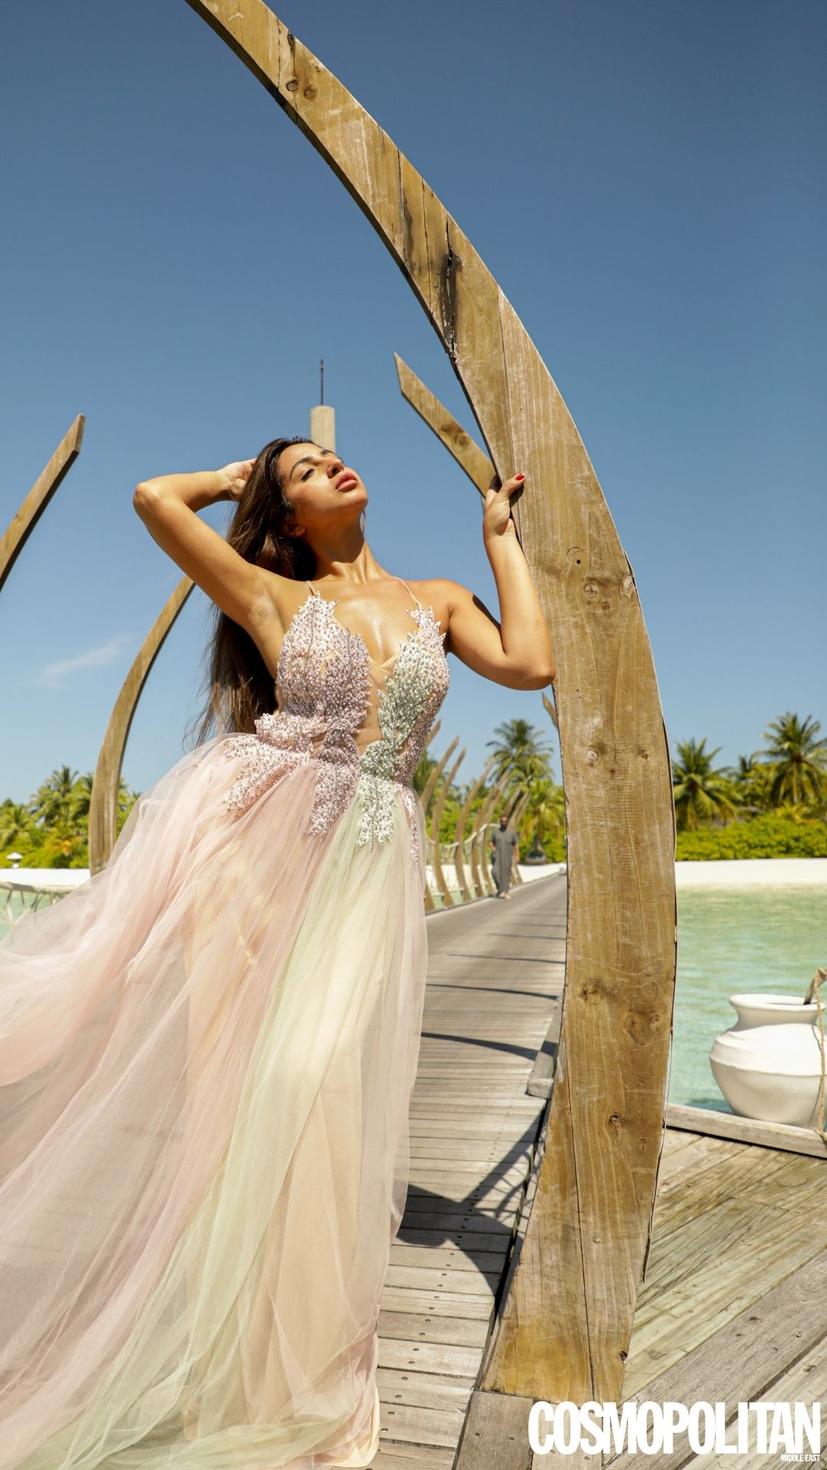 Here's what the Cosmo ME Hype House wore on their Maldivian getaway ...